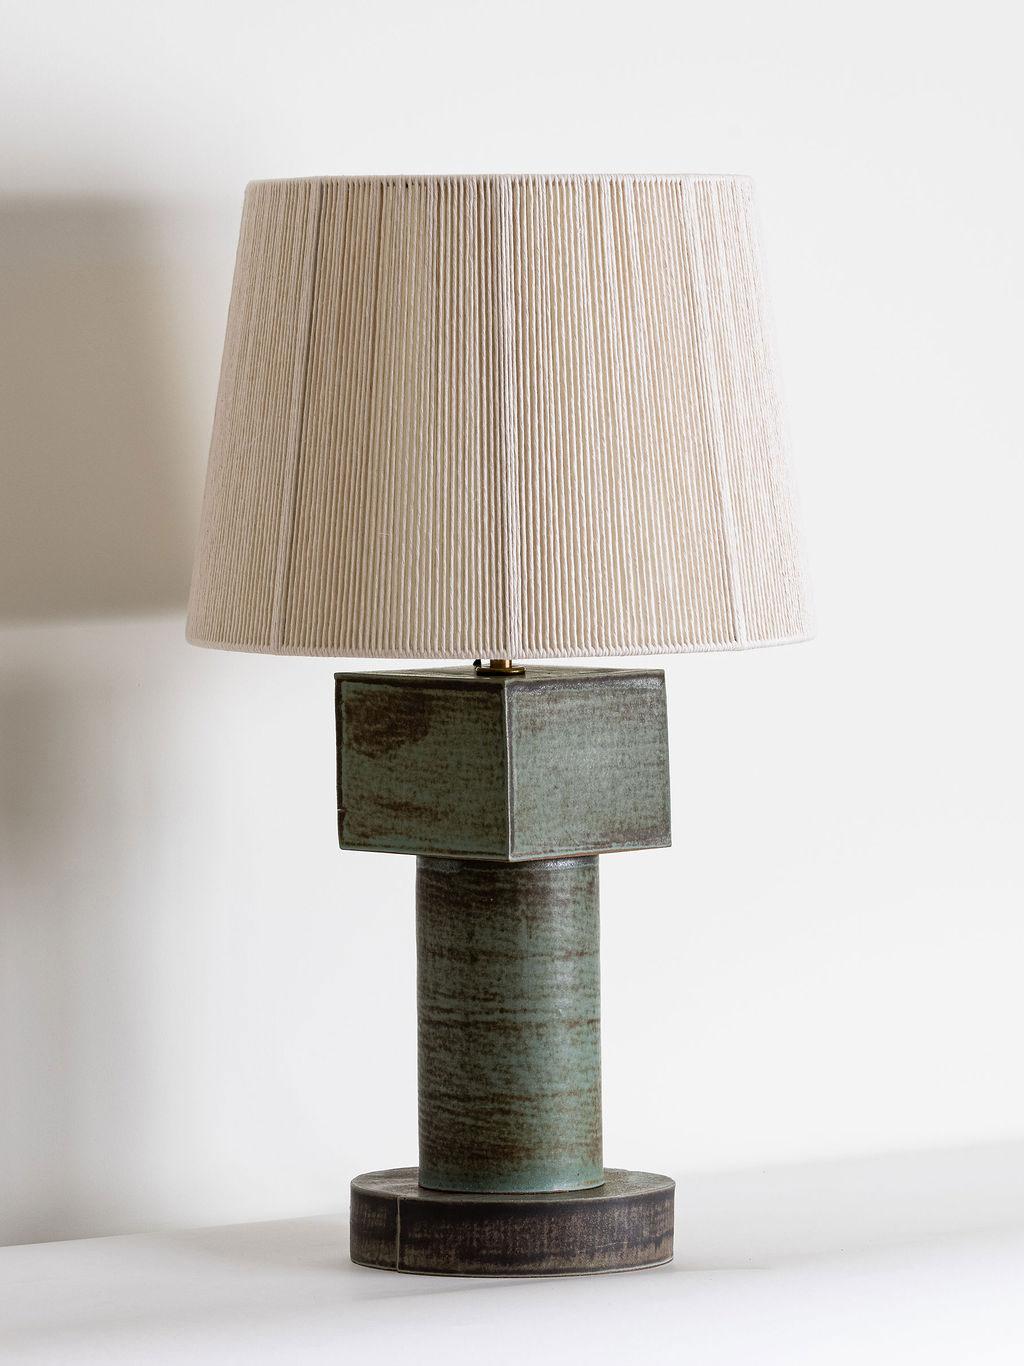 Our newest collection is inspired by classical column structures and
the whimsy of childhood. Each lamp includes a pedestal, base, and
column, but as with our beloved wooden building blocks, we
playfully stacked the components to create unexpected